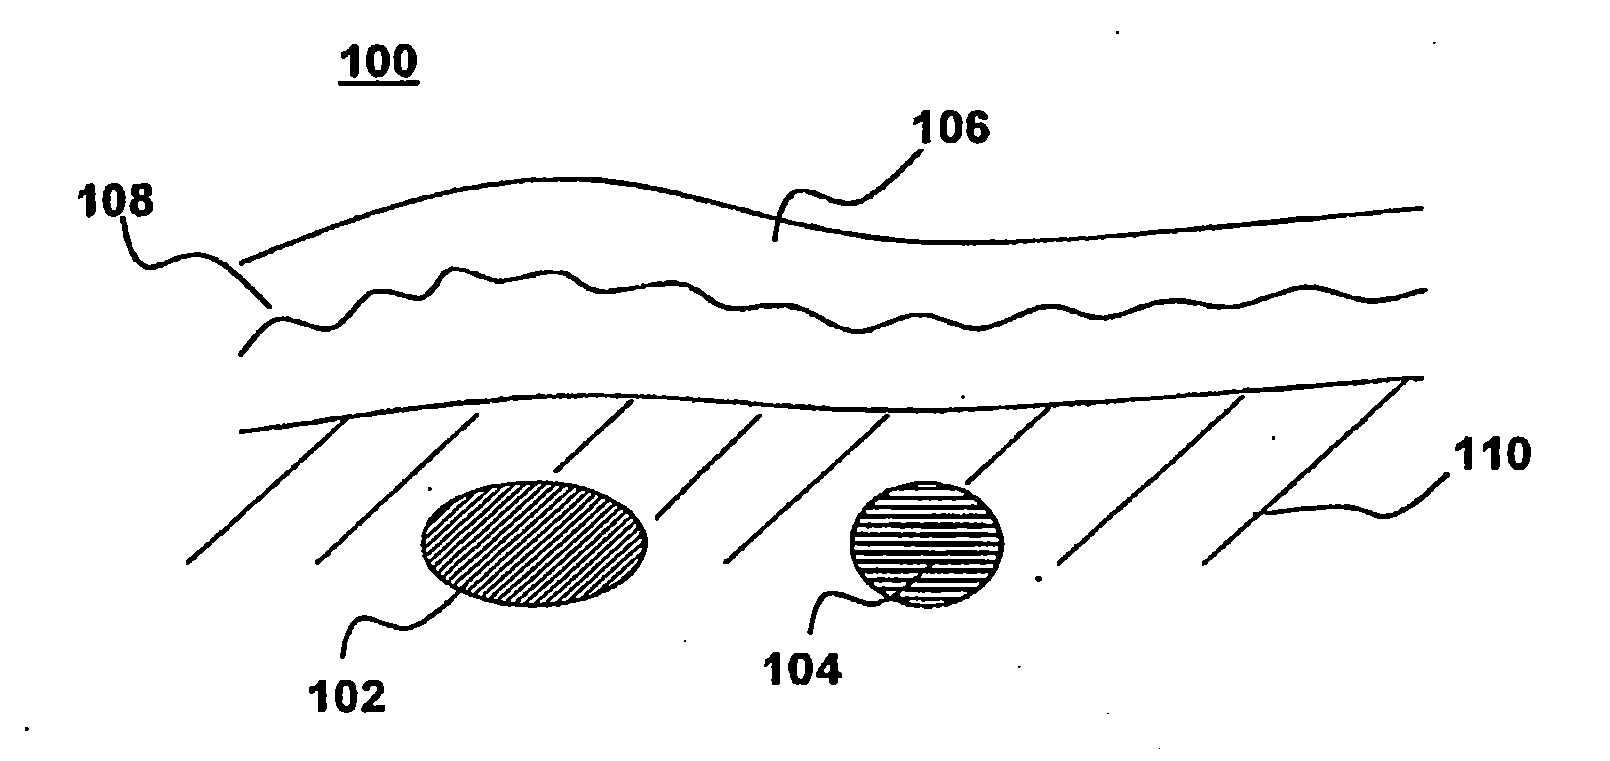 Apparatus and method for non-invasive and minimally-invasive sensing of parameters relating to blood